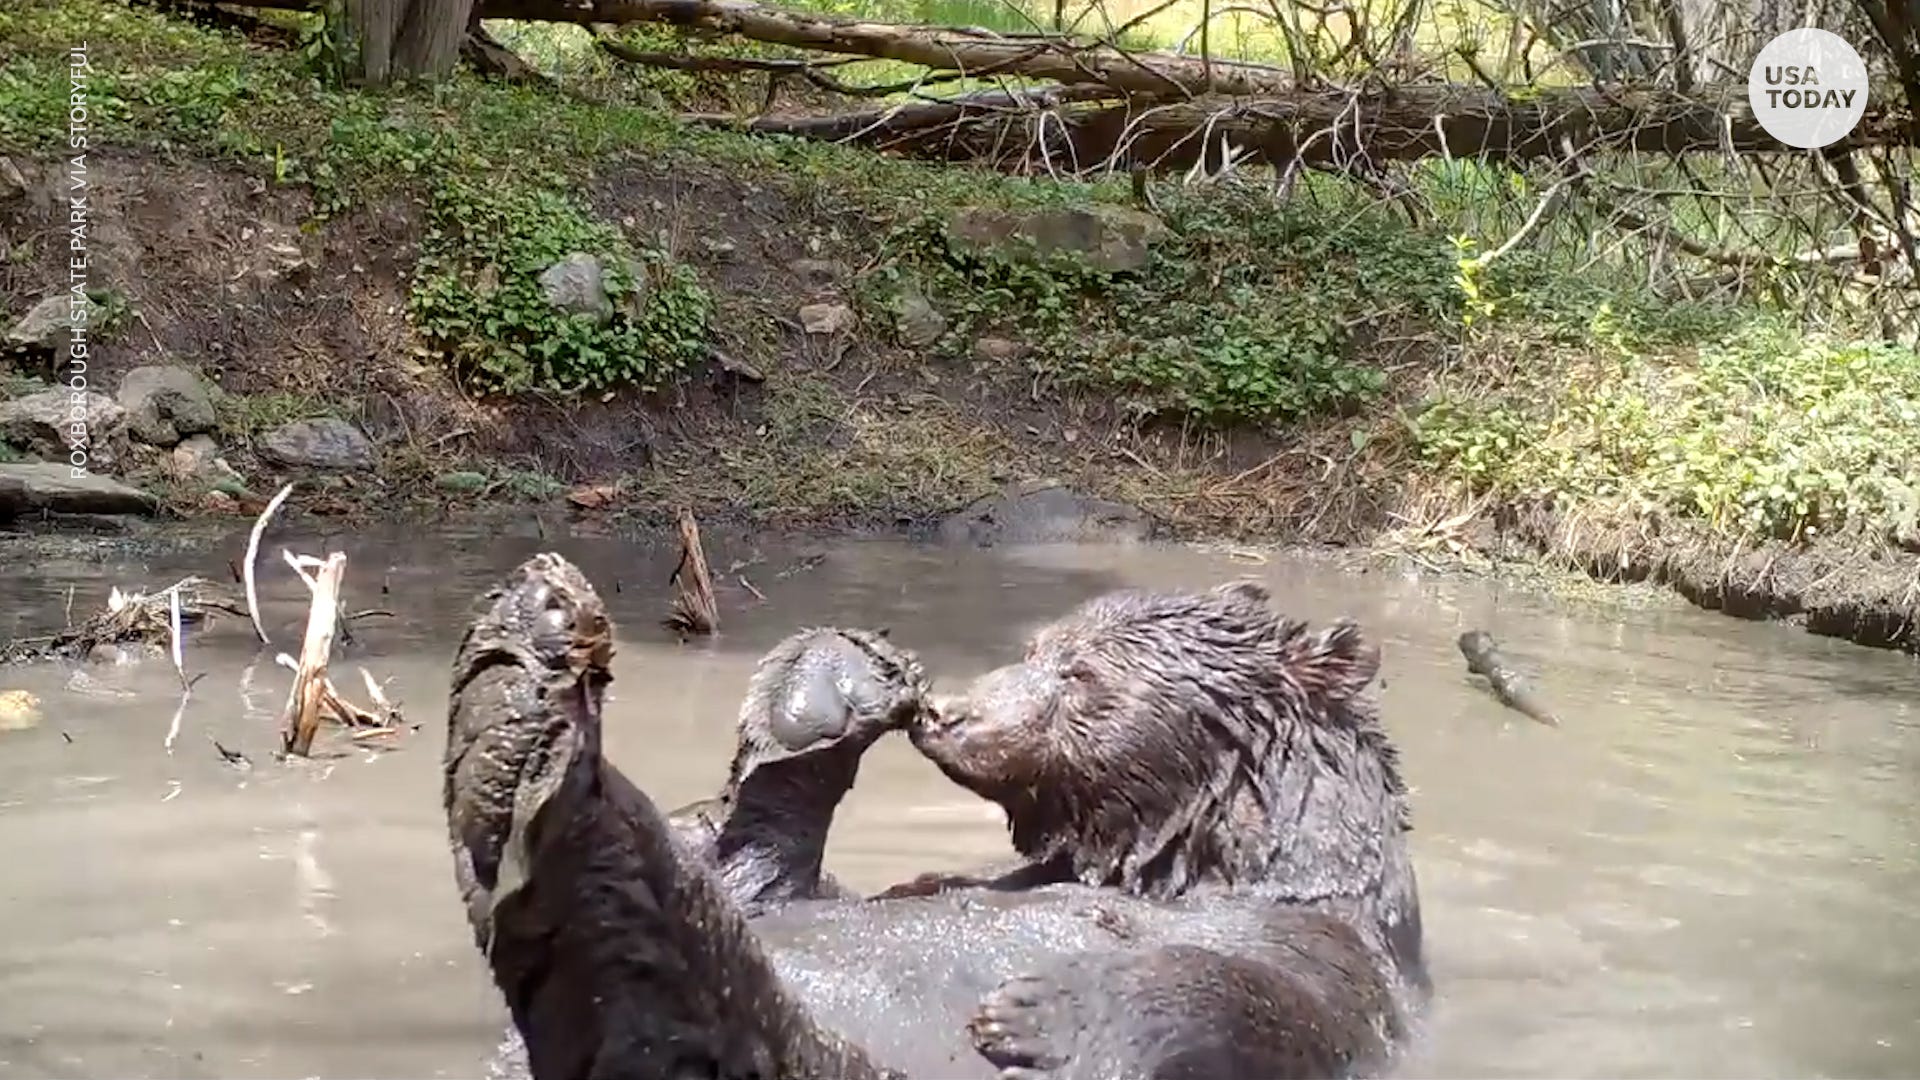 Bear fights off high temperatures with a dip and swim in muddy puddle